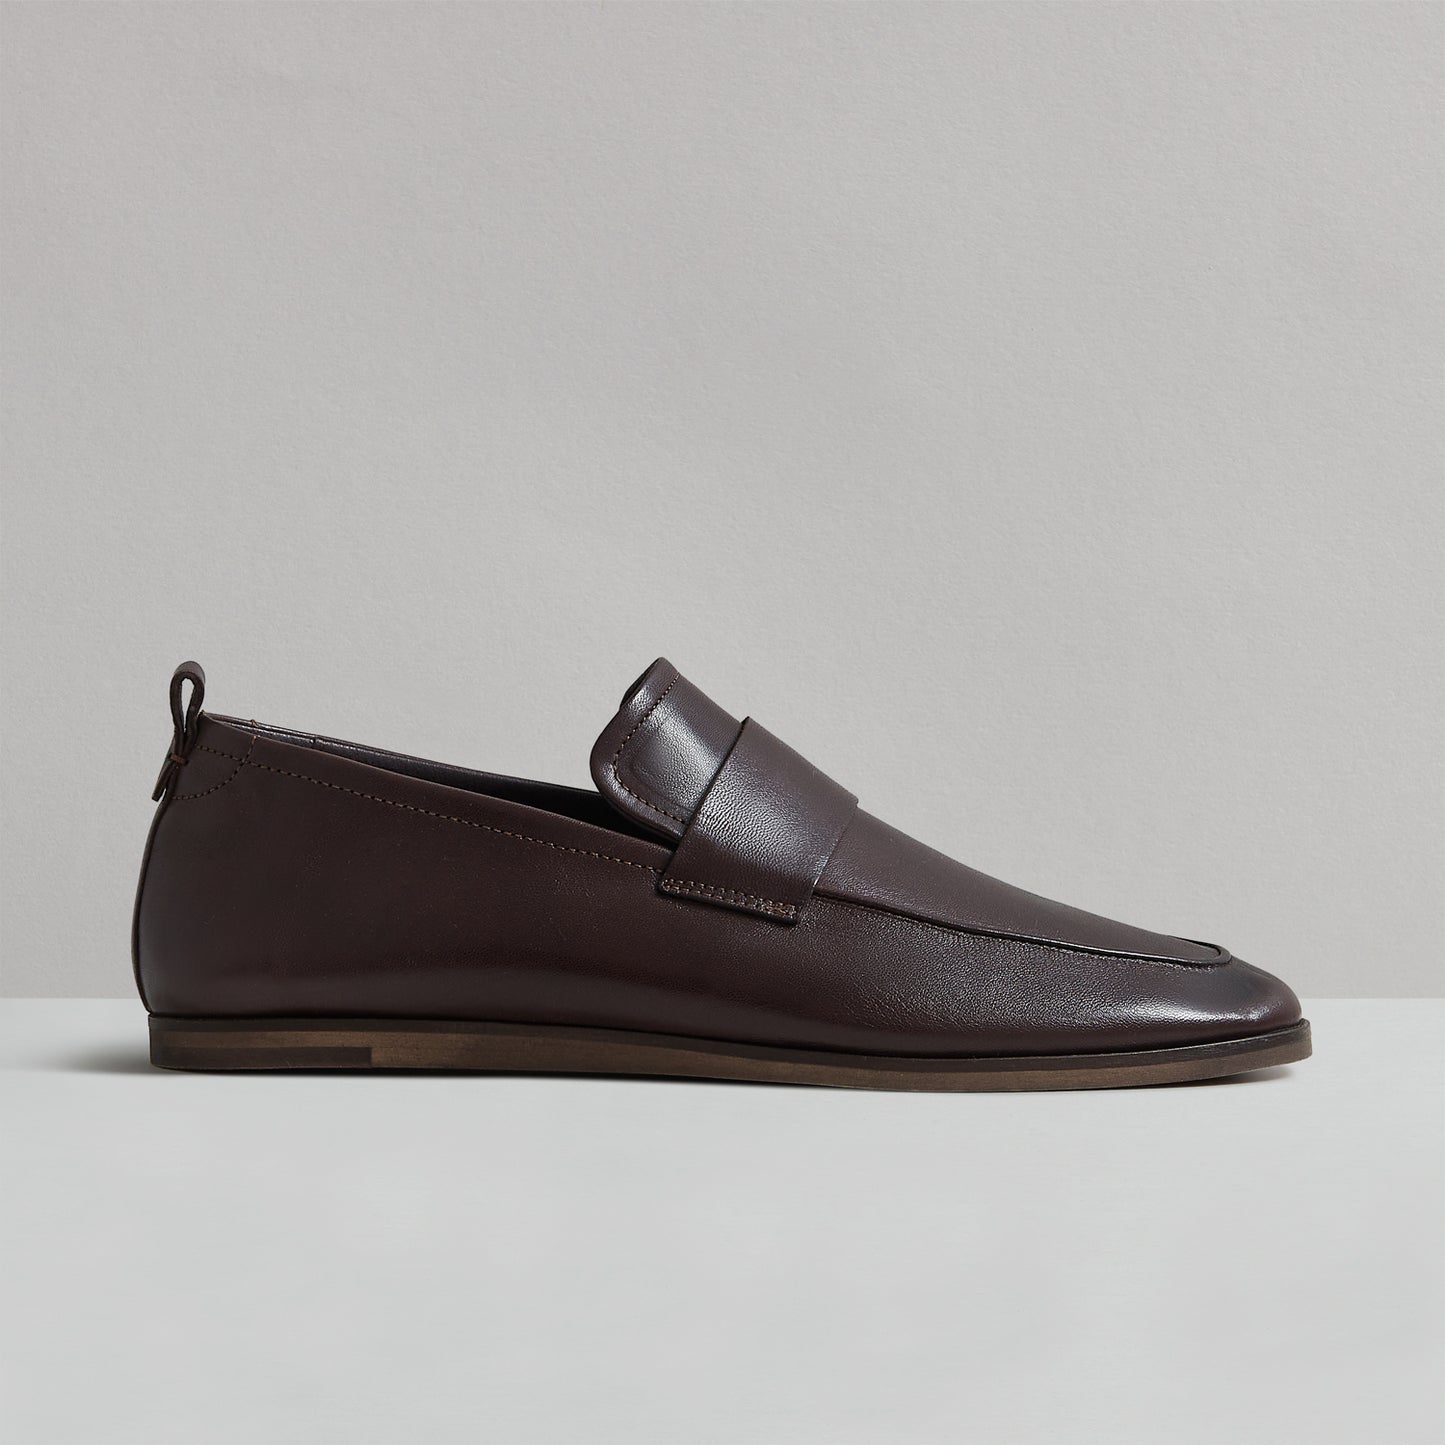 PORTO TAN LEATHER LOAFER